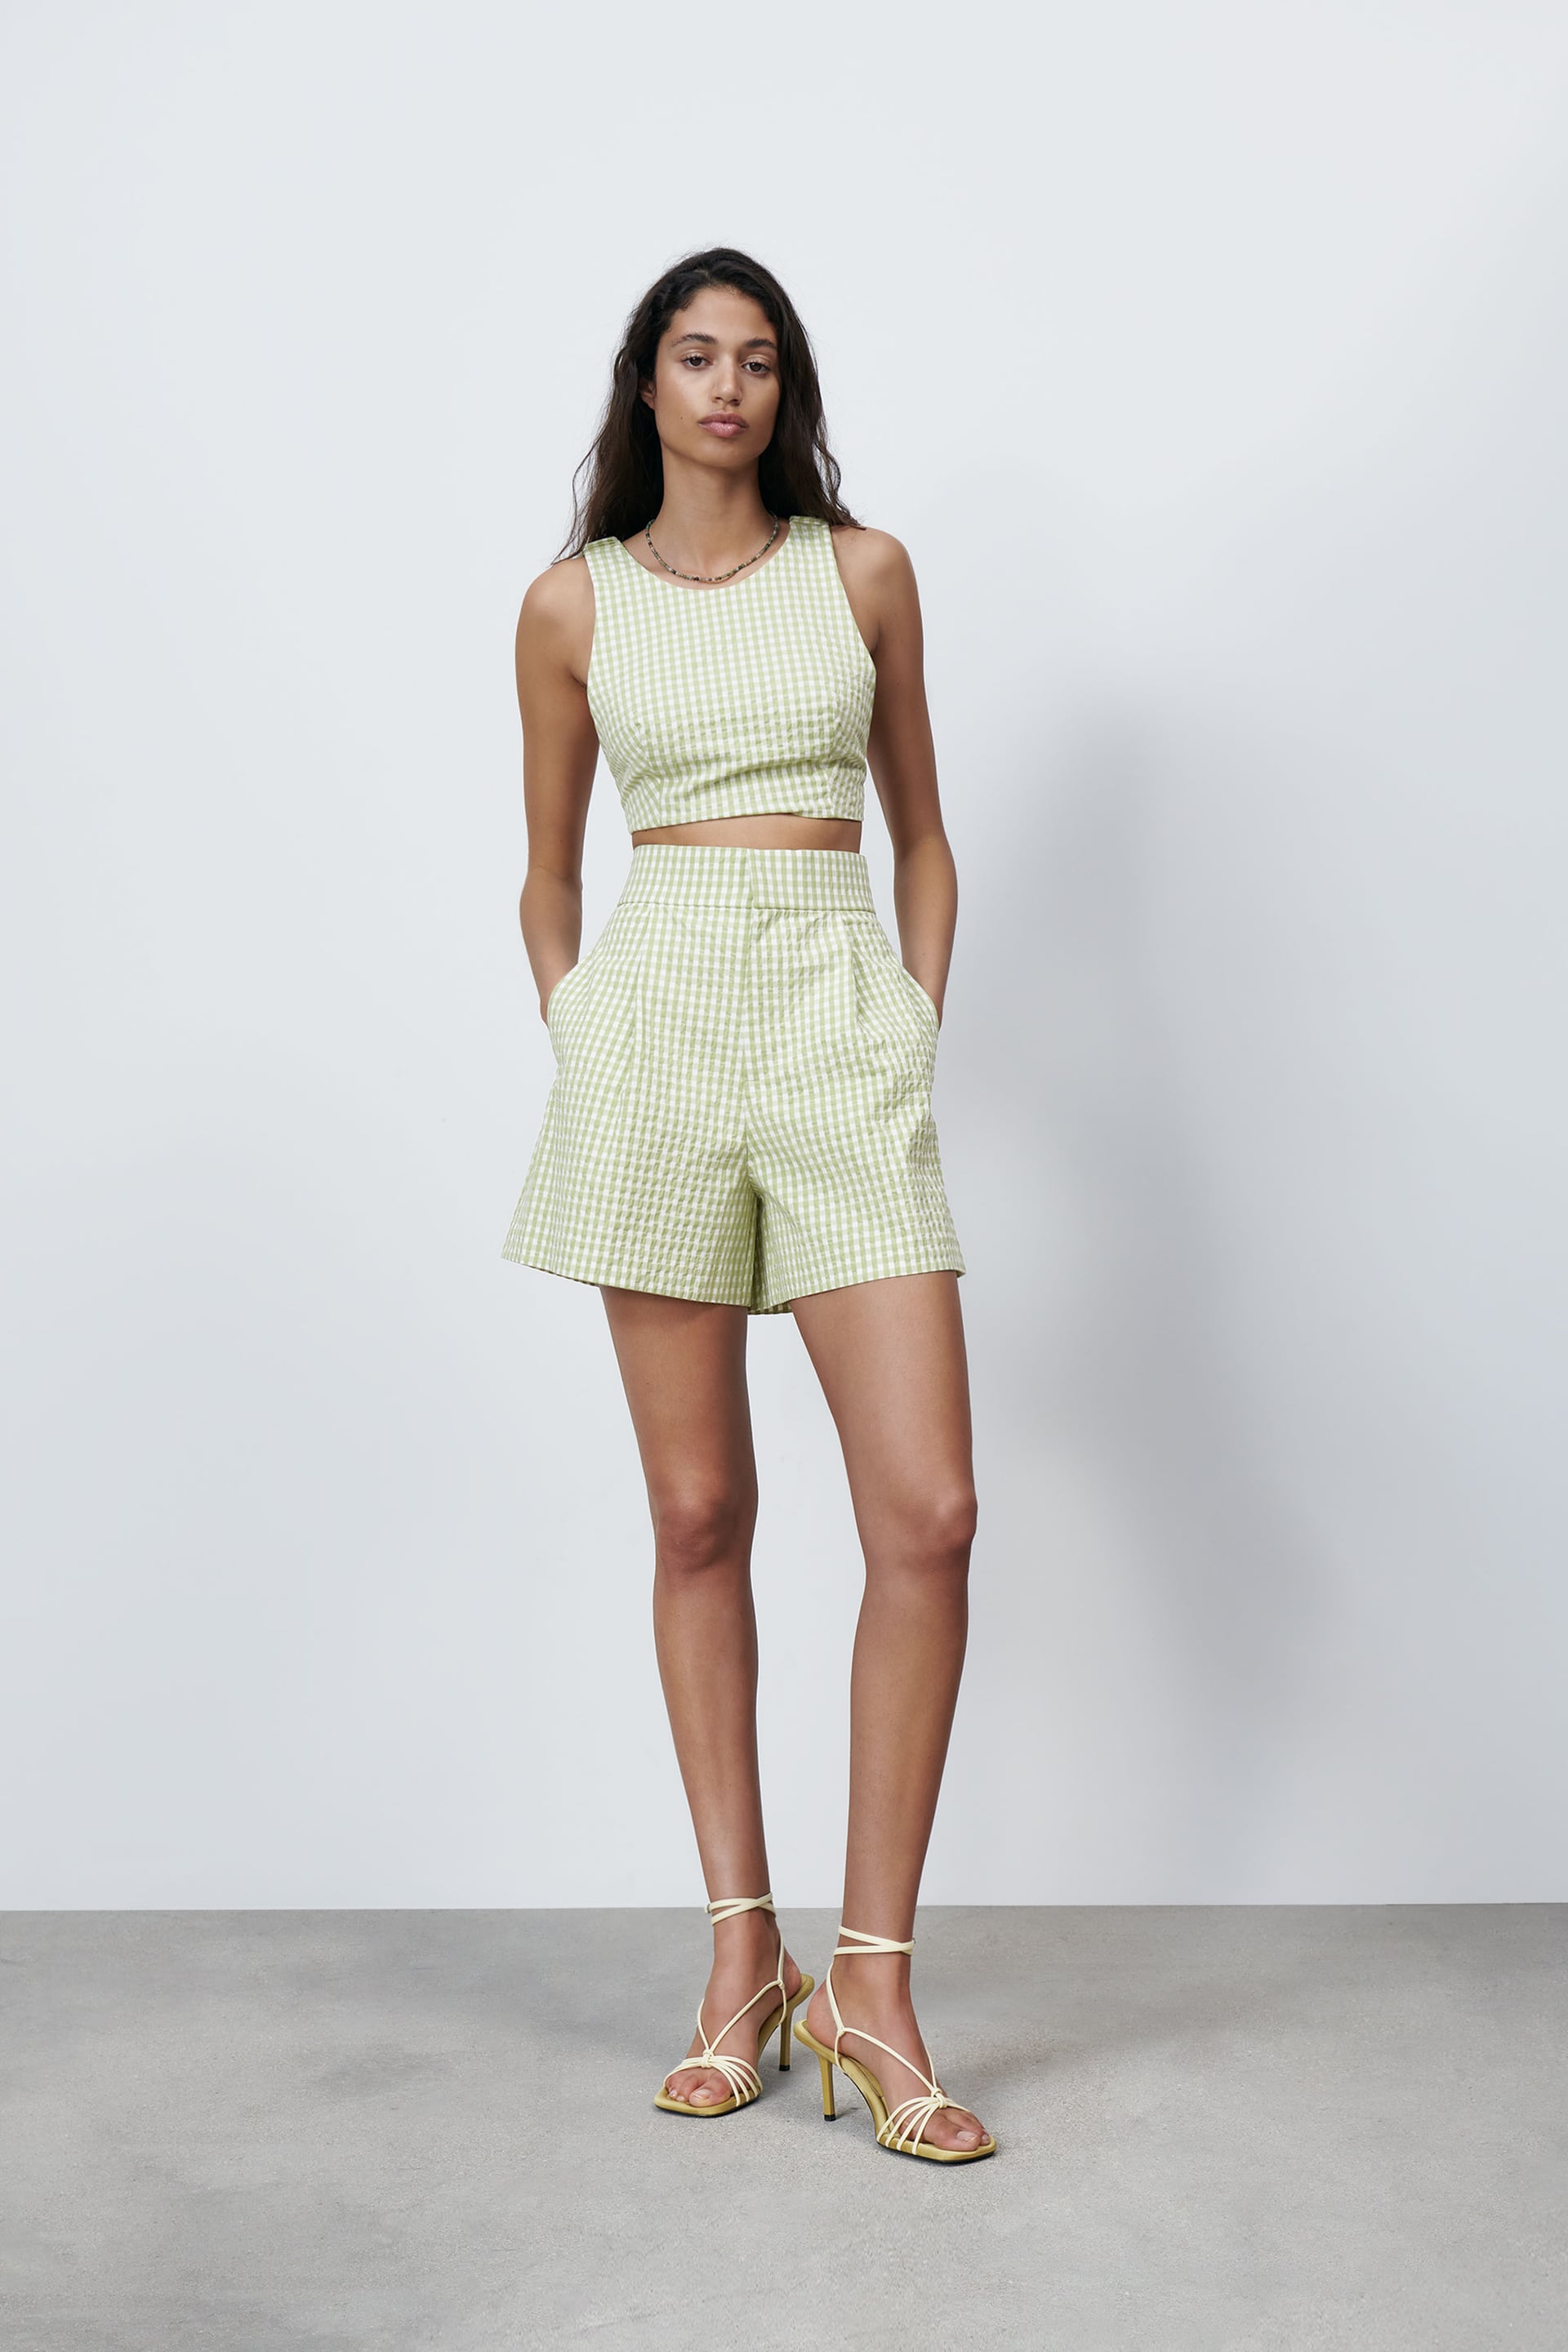 4 Colours Zara Is Backing In A Big Way for Spring